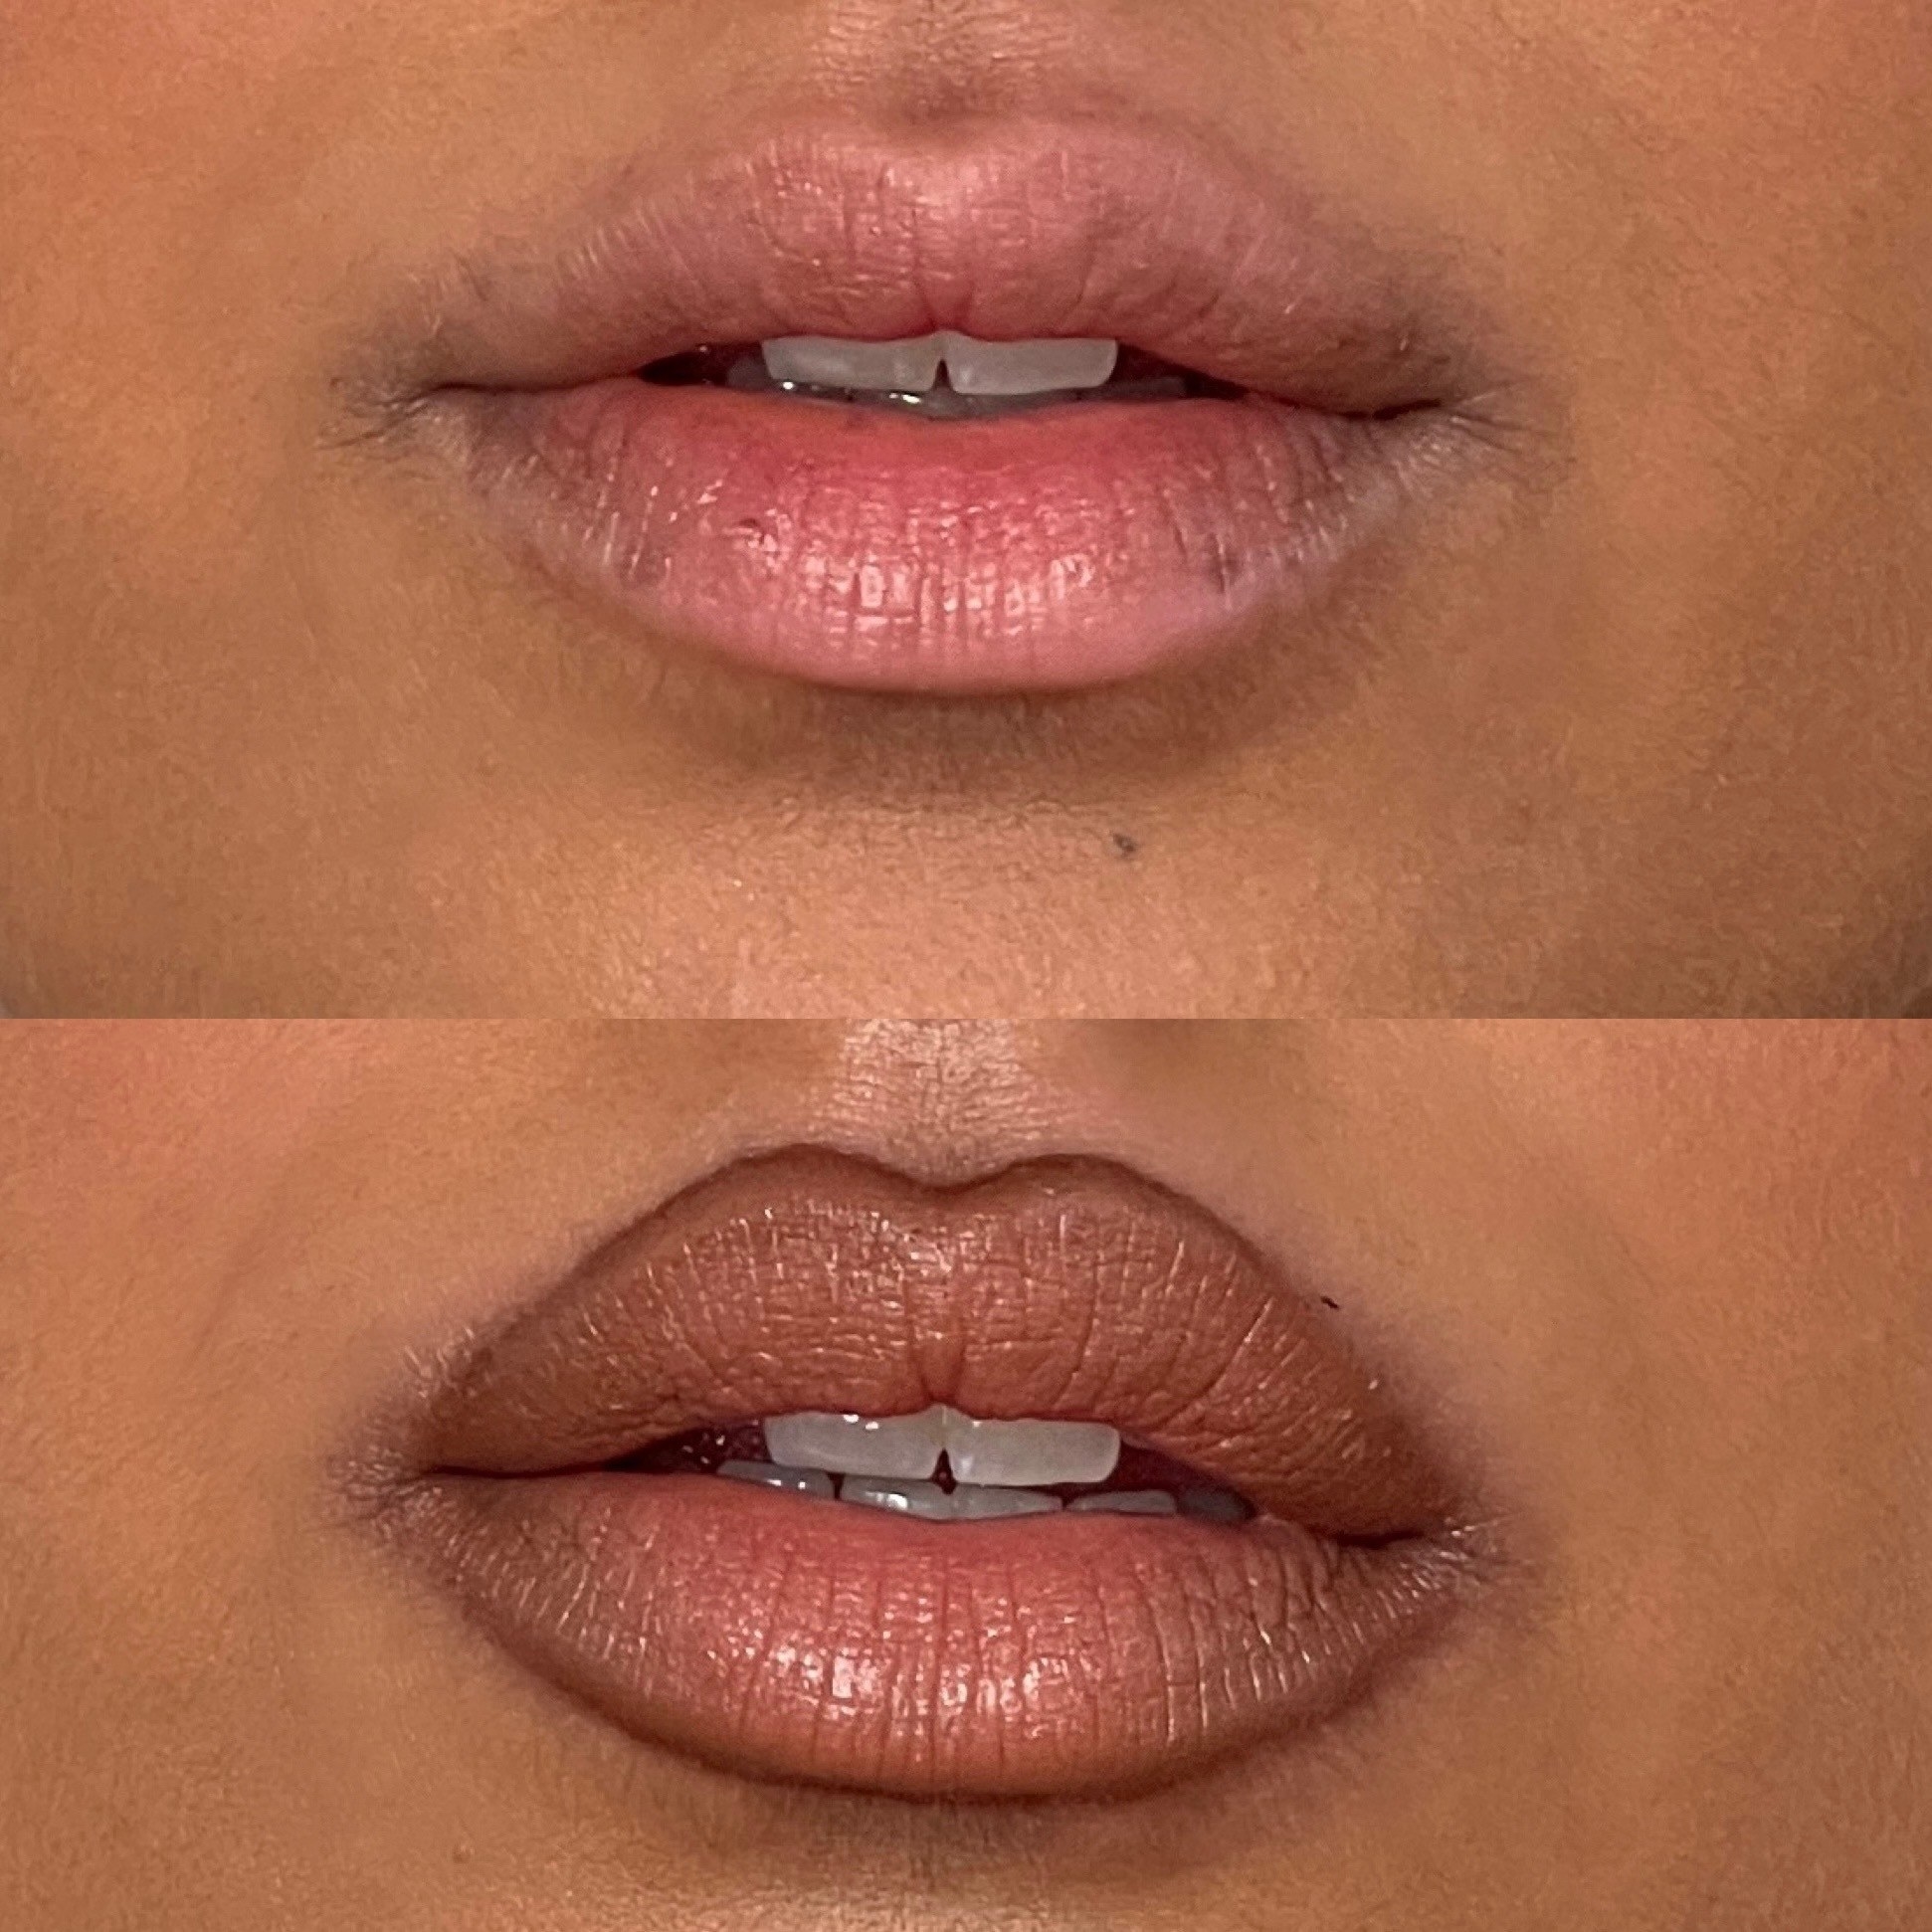 The difference with and without using this technique